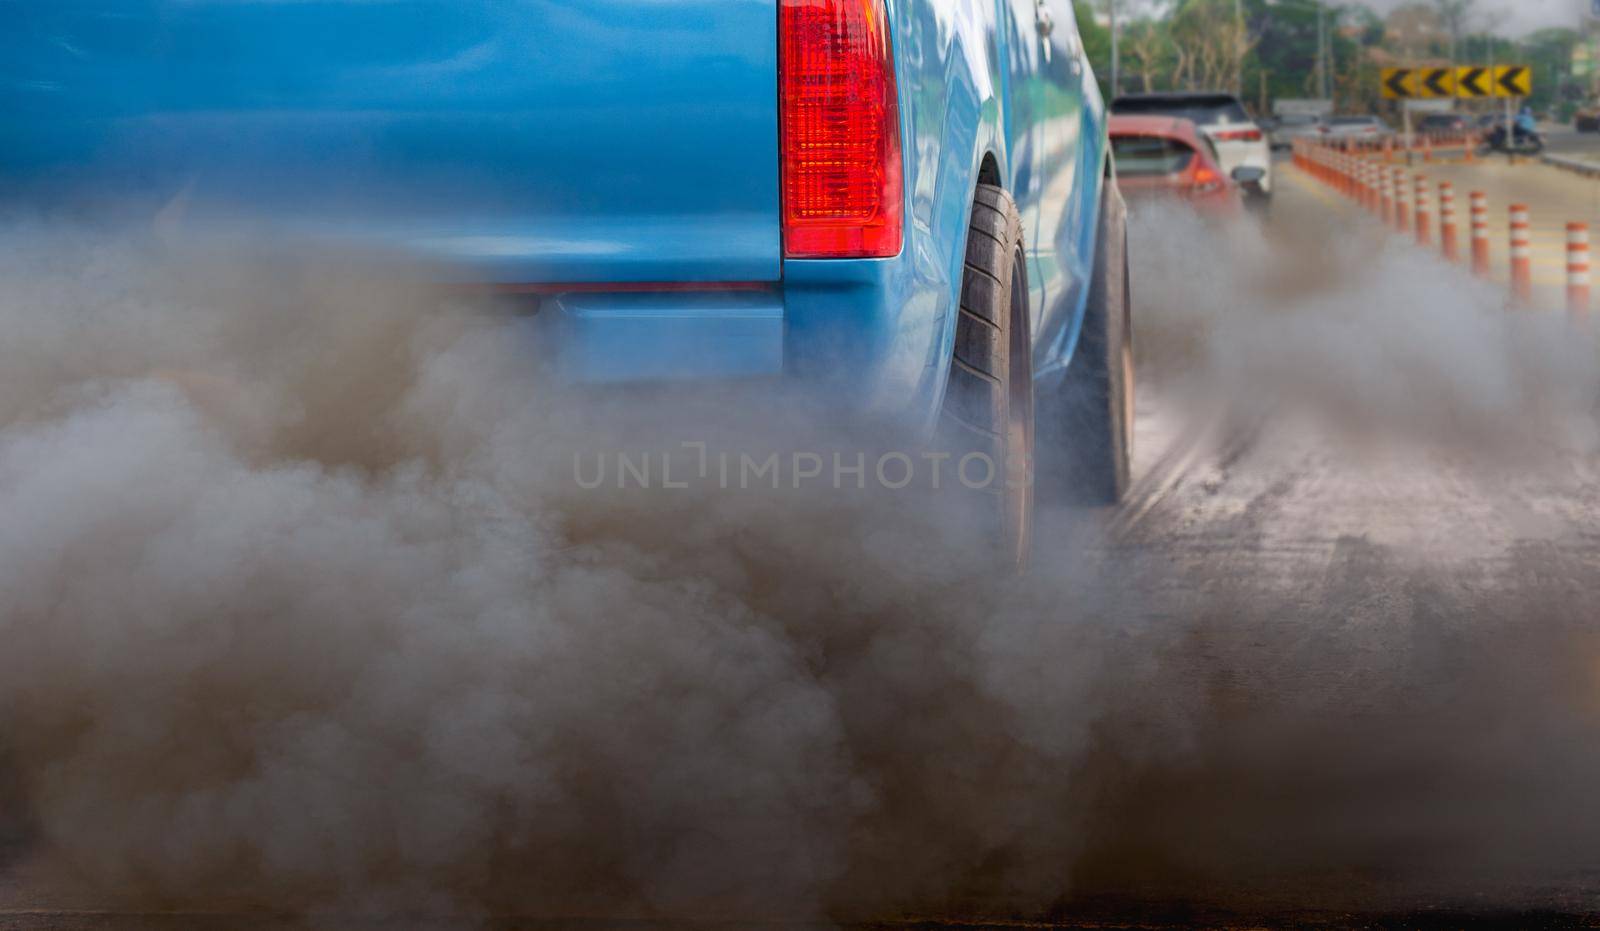 air pollution crisis in city from diesel vehicle exhaust pipe on road   by toa55